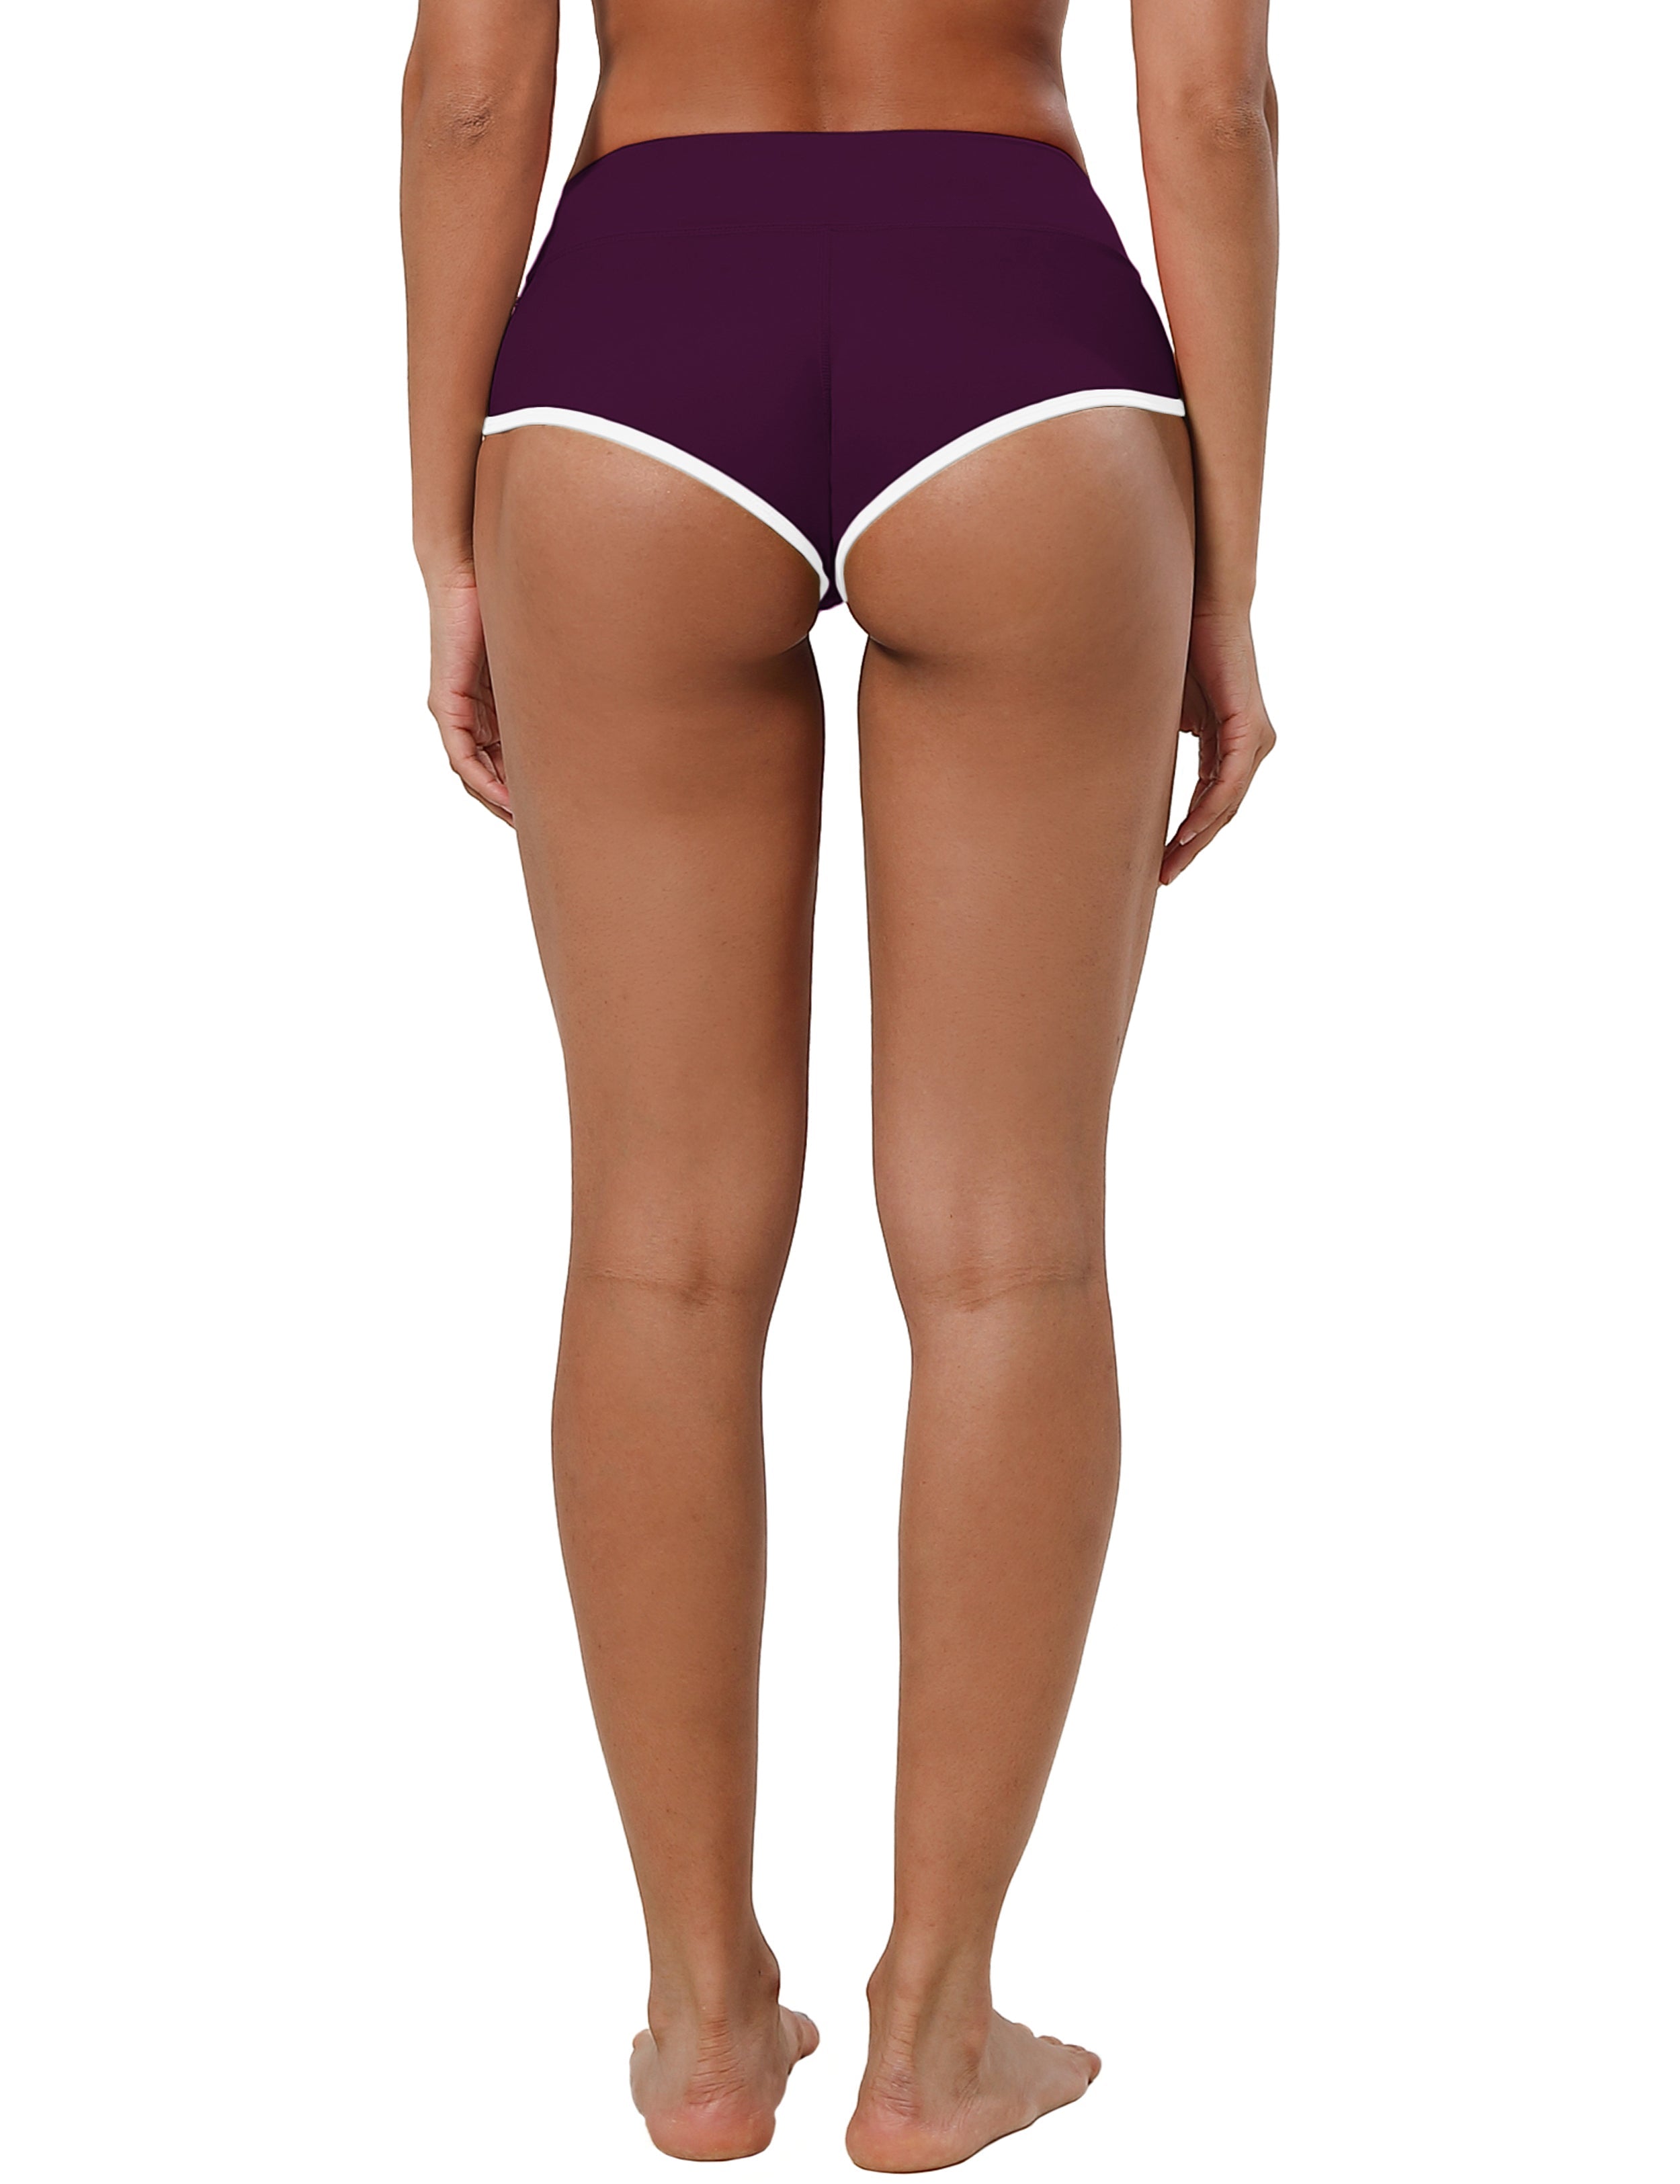 Sexy Booty Biking Shorts plum Sleek, soft, smooth and totally comfortable: our newest sexy style is here. Softest-ever fabric High elasticity High density 4-way stretch Fabric doesn't attract lint easily No see-through Moisture-wicking Machine wash 75%Nylon/25%Spandex